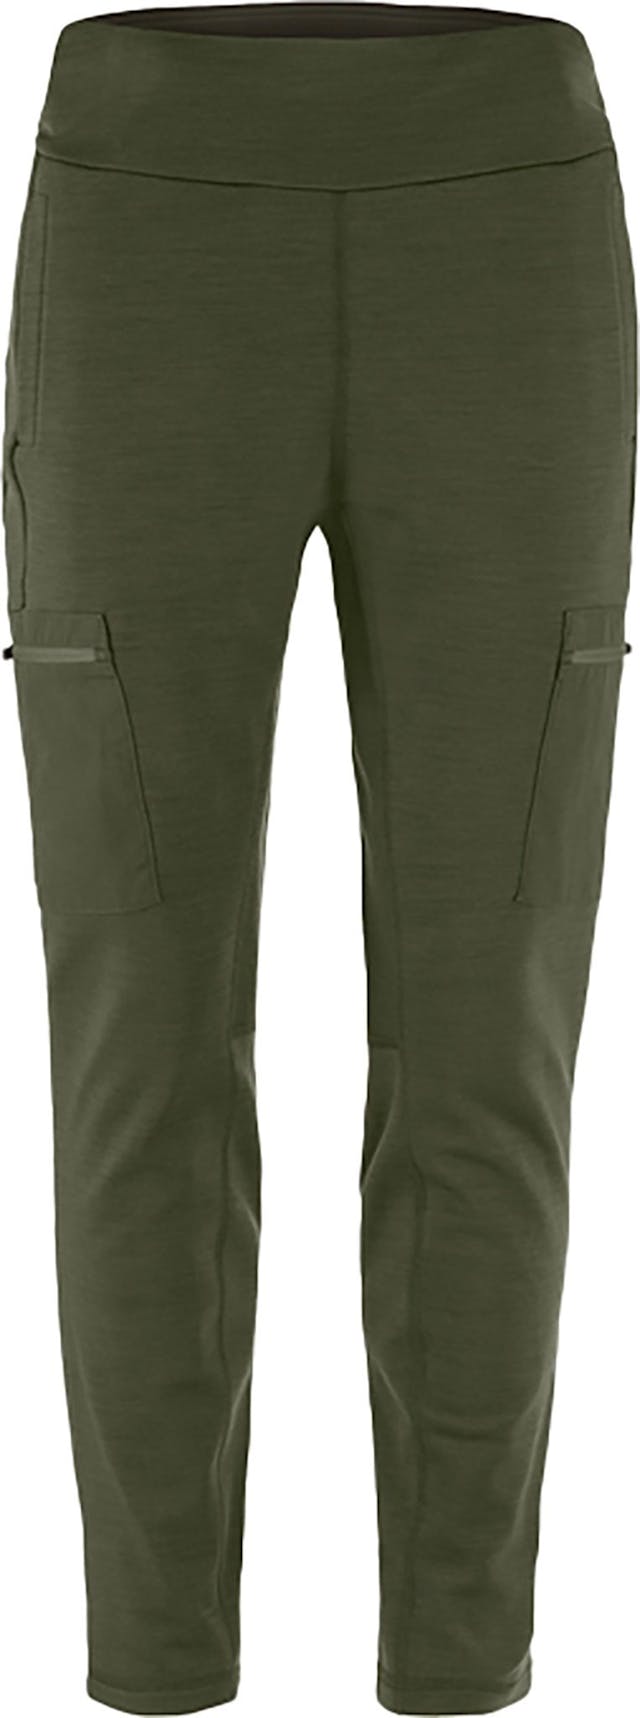 Product image for Keb Fleece Trousers - Women's